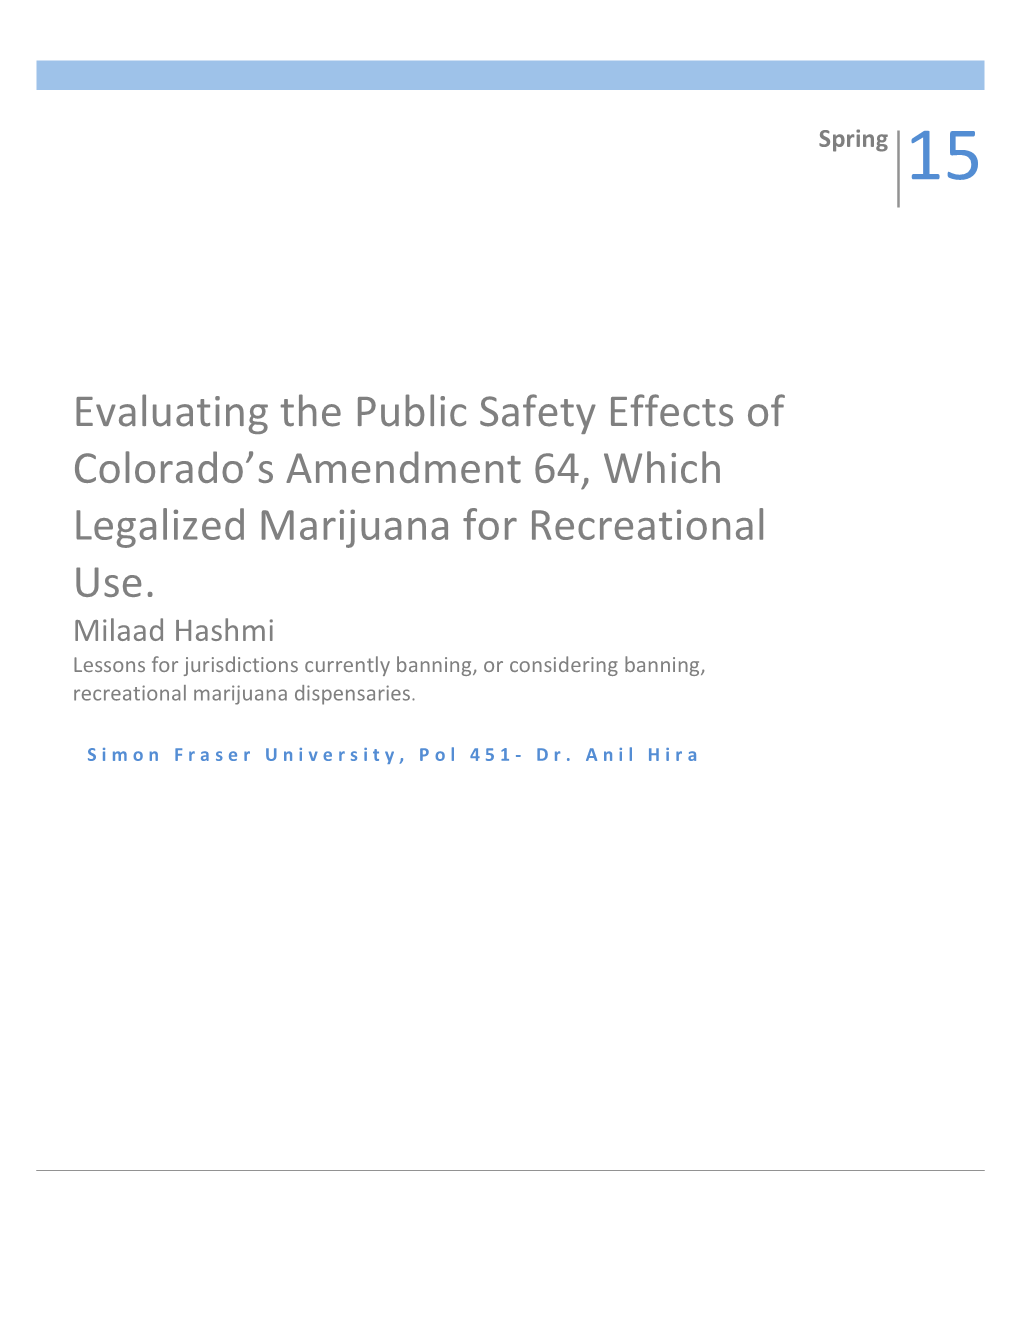 Evaluating the Public Safety Effects of Colorado's Amendment 64, Which